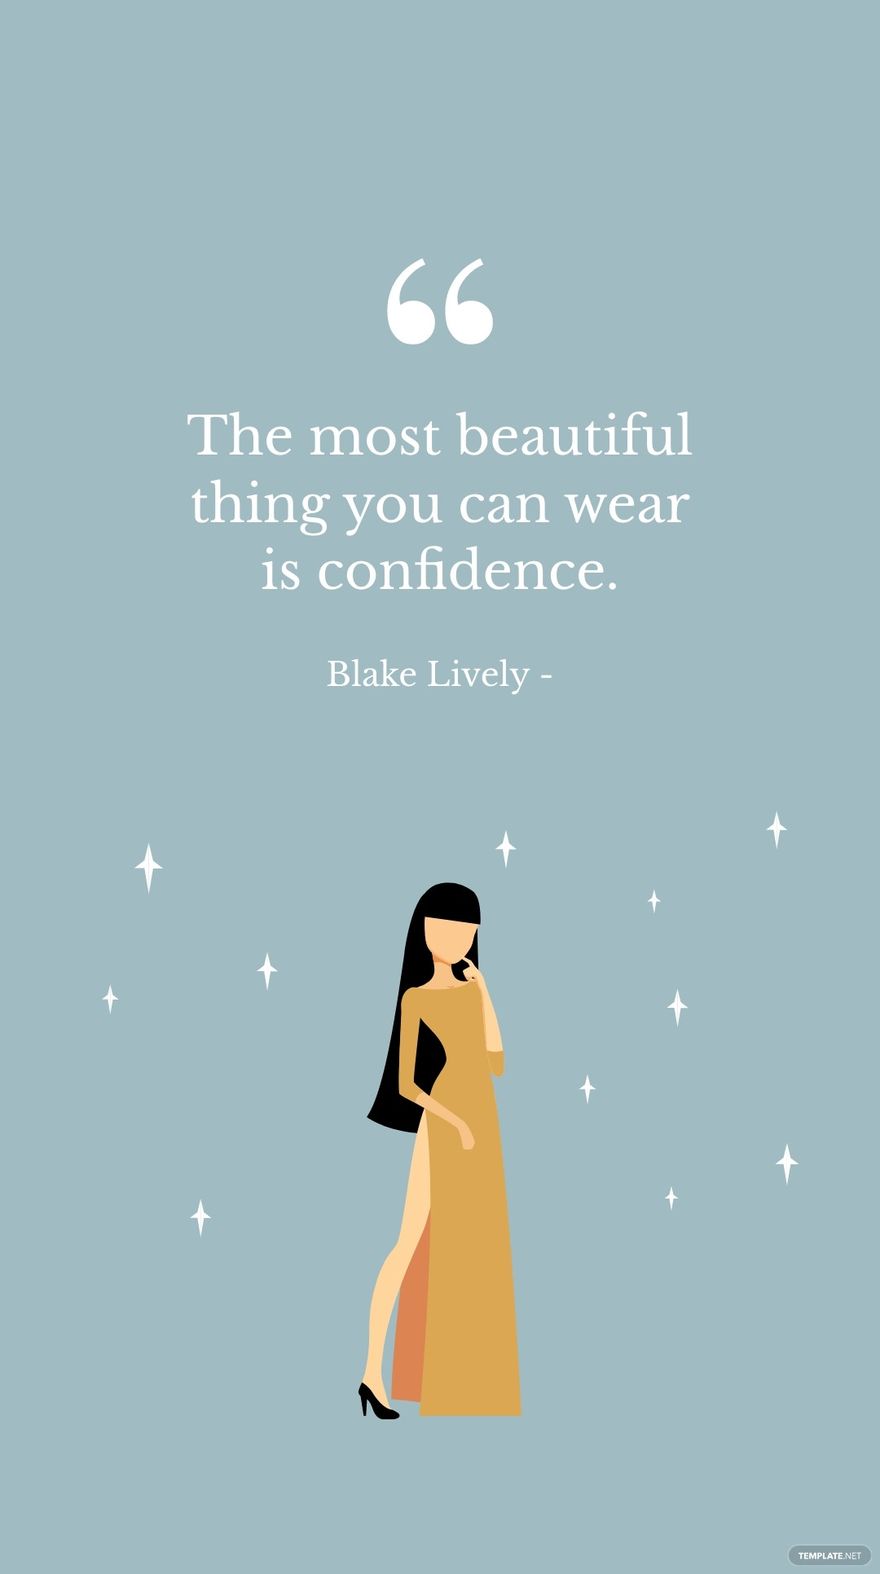 Free Blake Lively - The most beautiful thing you can wear is confidence. in JPG